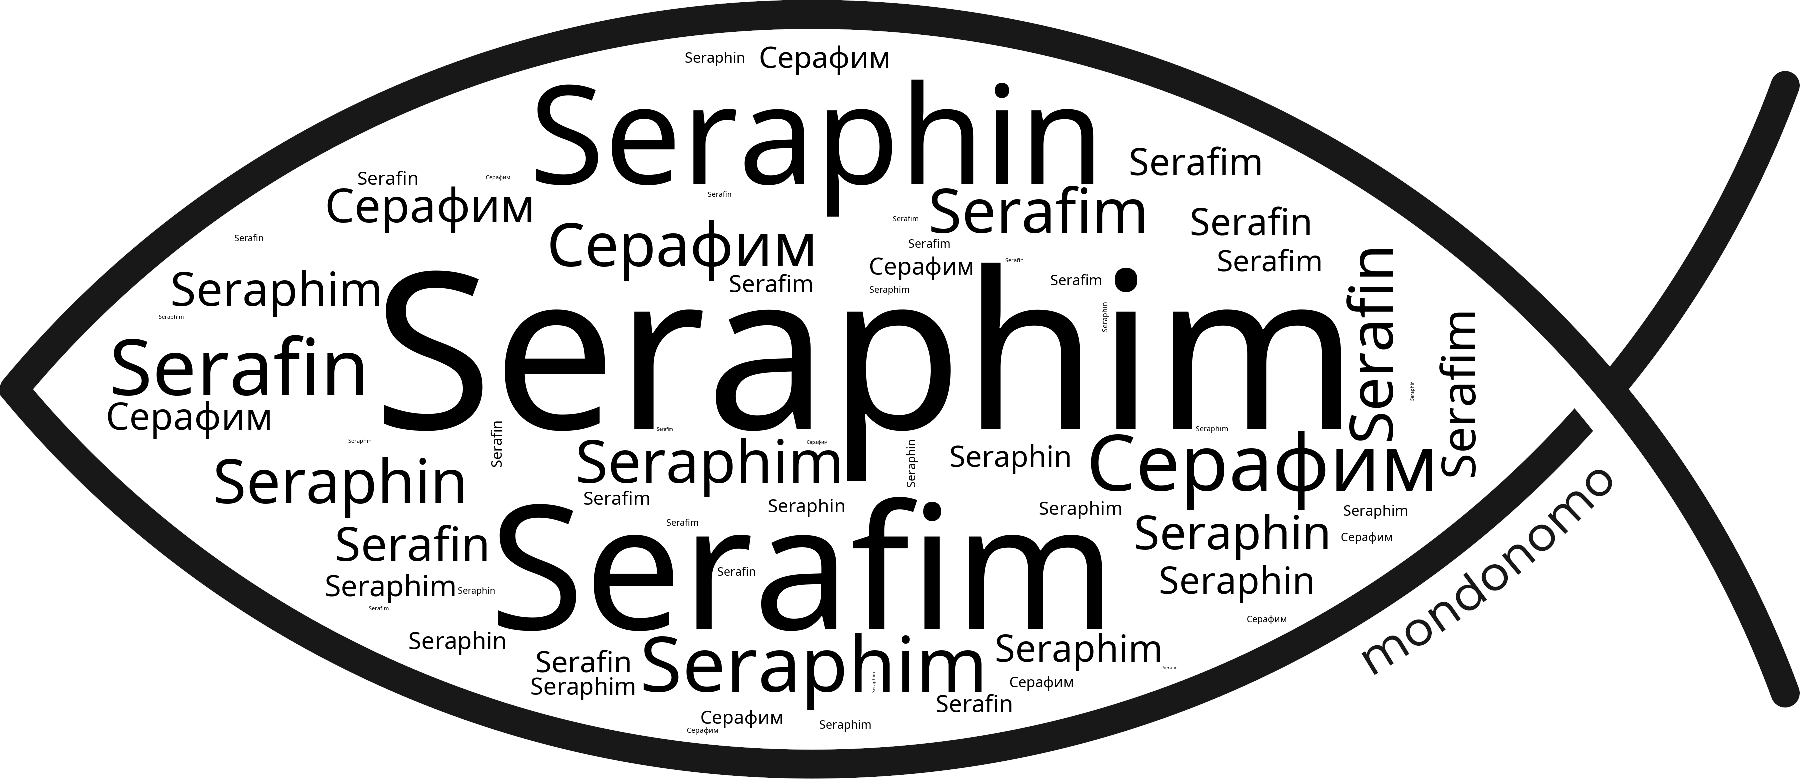 Name Seraphim in the world's Bibles